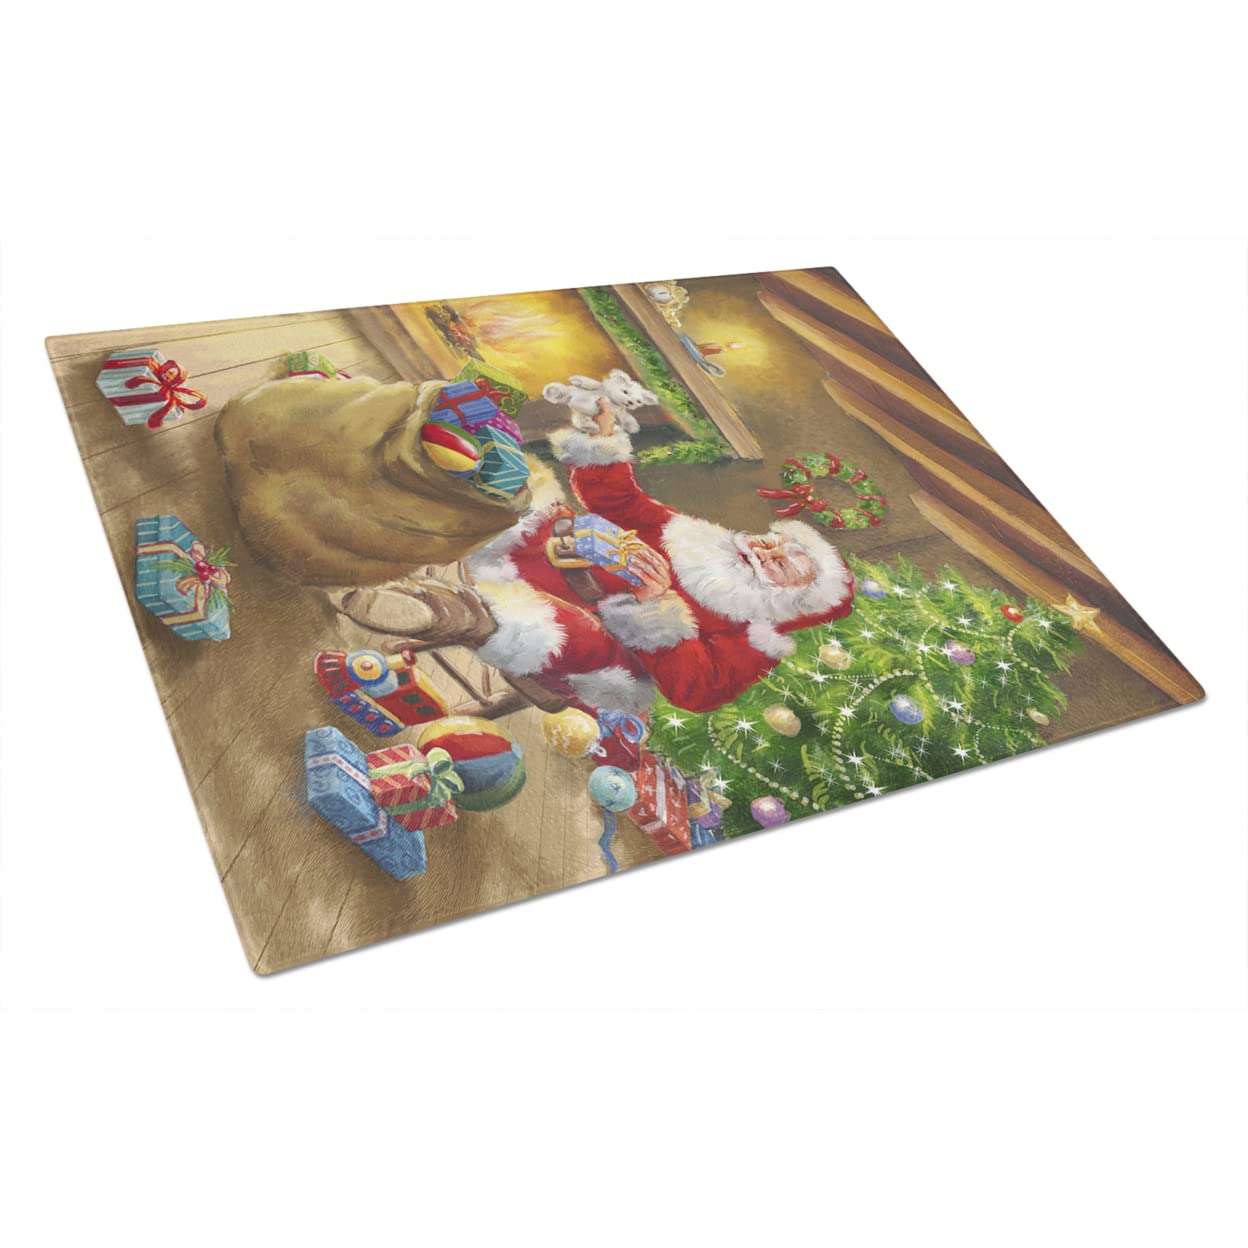 Caroline's Treasures APH5793LCB Christmas Santa Claus Unloading Toys Glass Cutting Board Large Decorative Tempered Glass Kitchen Cutting and Serving Board Large Size Chopping Board